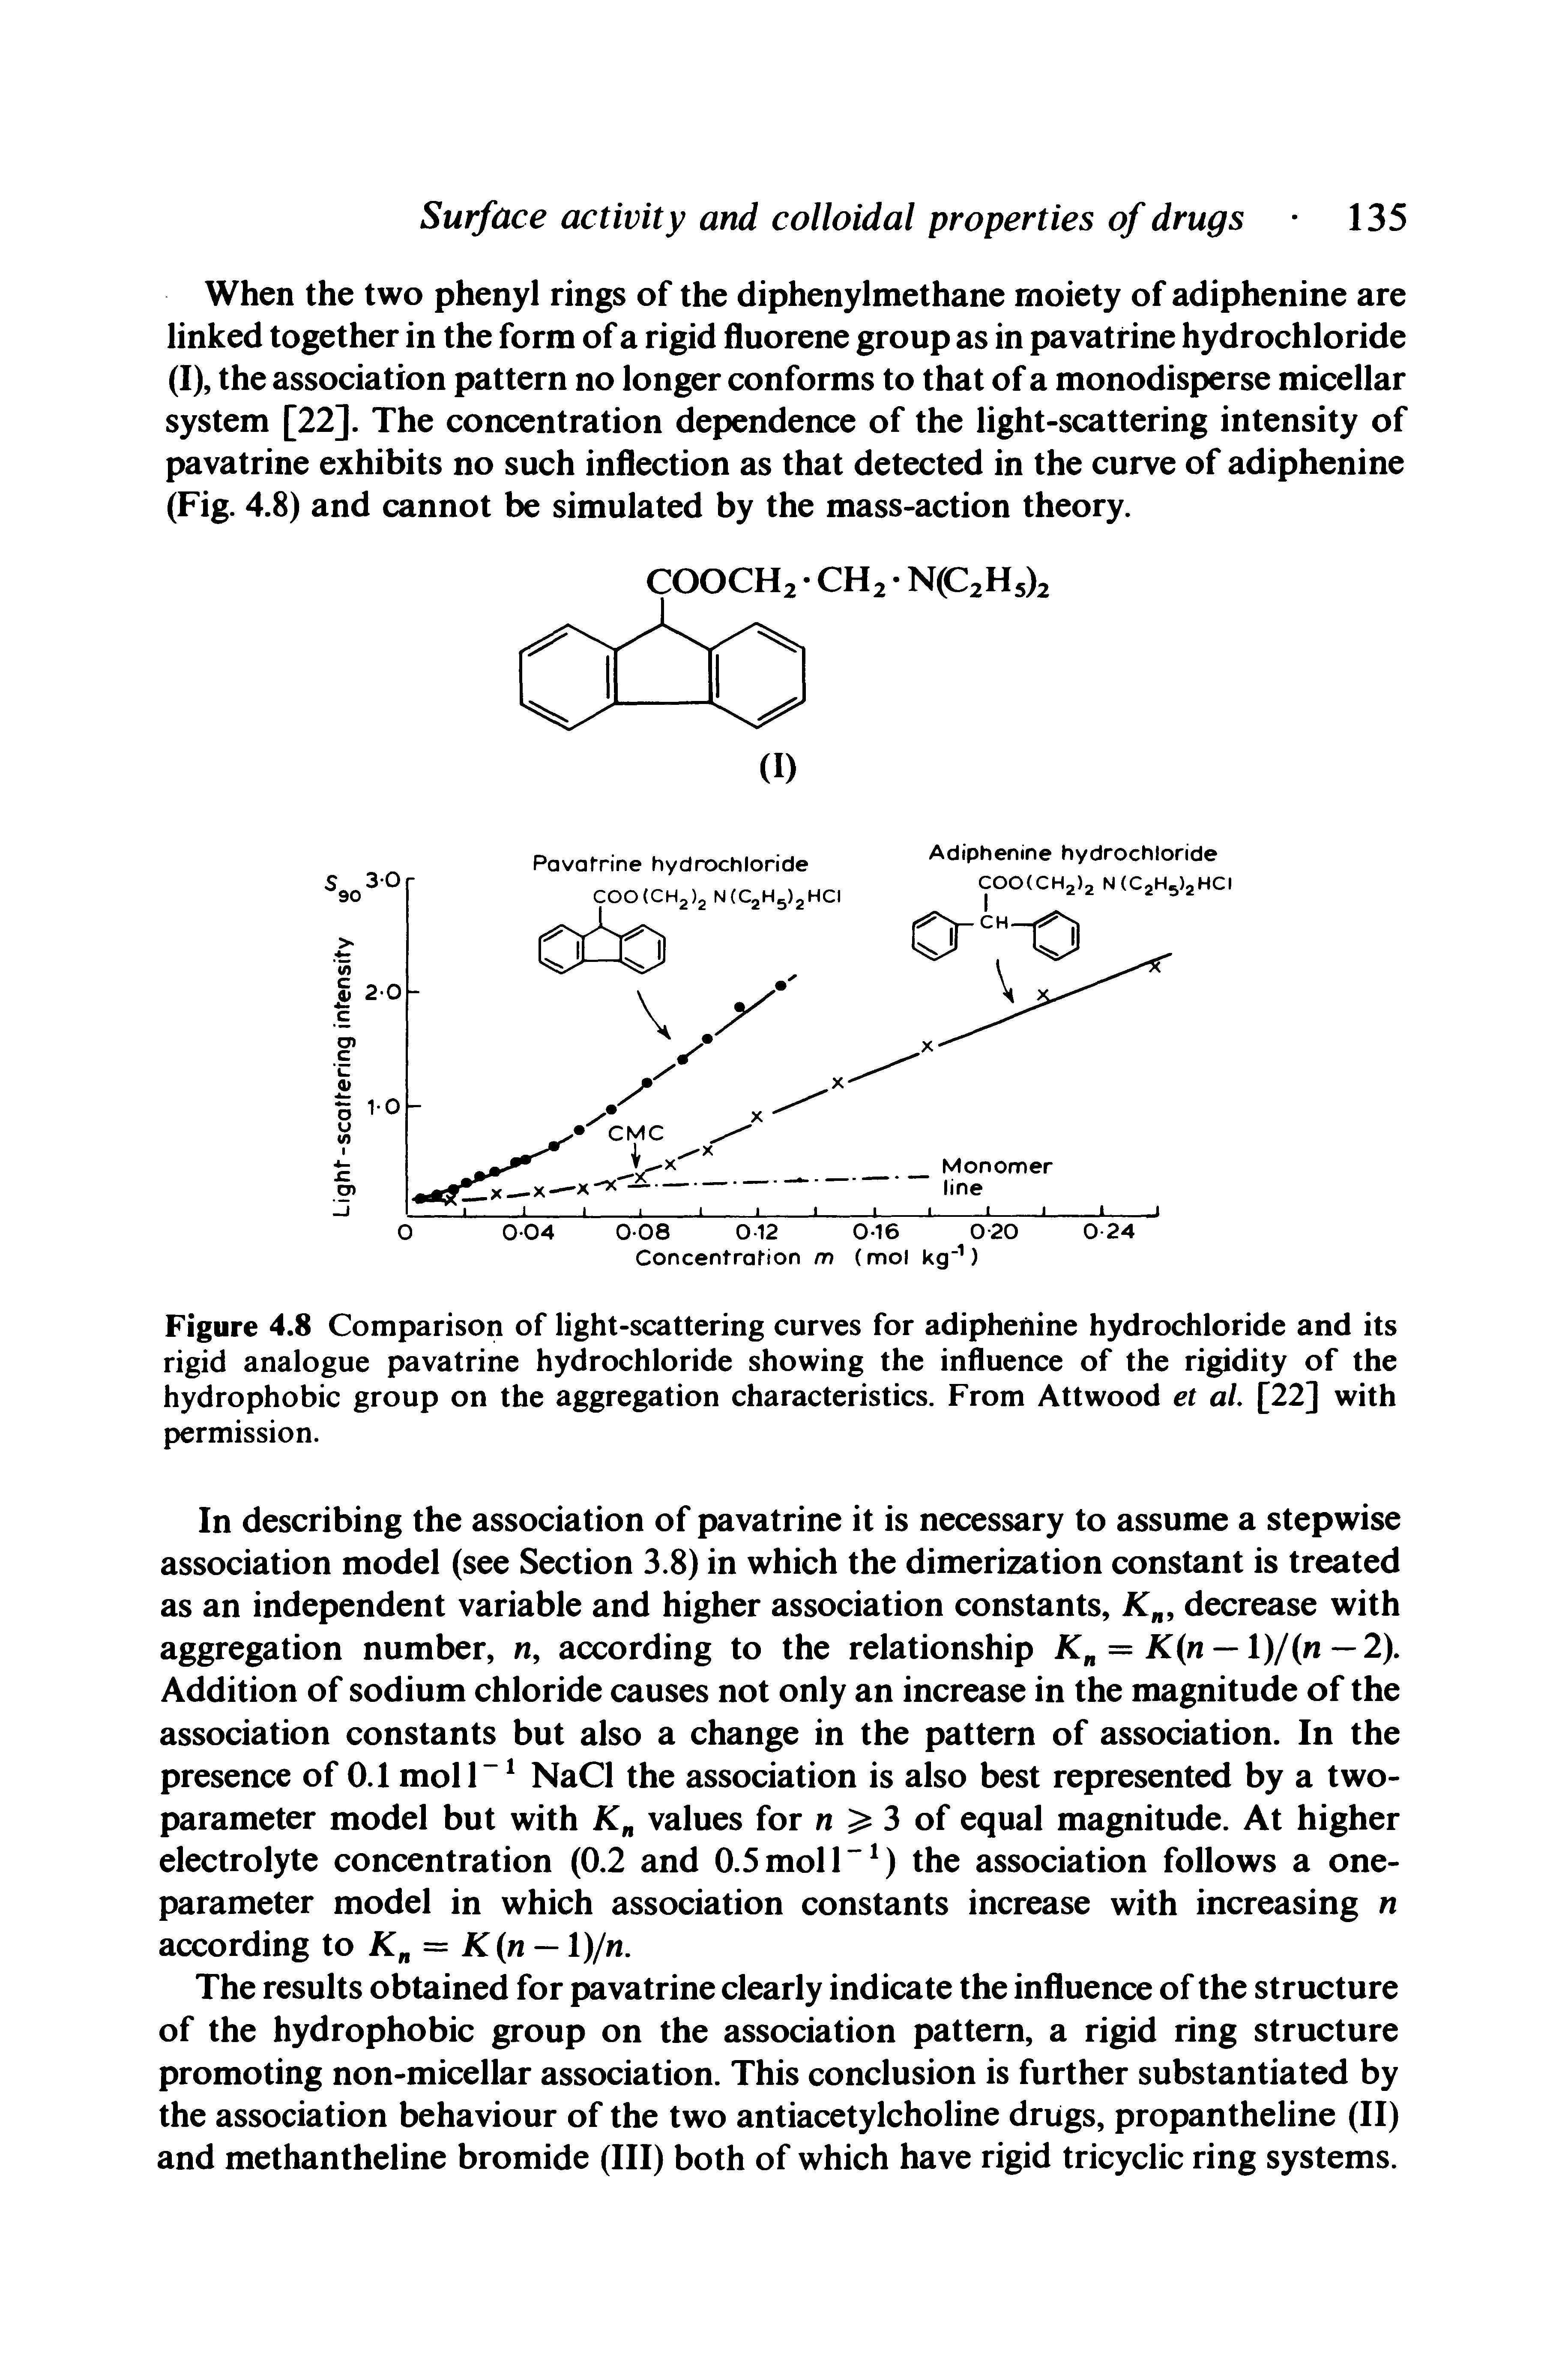 Figure 4.8 Comparison of light-scattering curves for adiphenine hydrochloride and its rigid analogue pavatrine hydrochloride showing the influence of the rigidity of the hydrophobic group on the aggregation characteristics. From Attwood et ai [22] with permission.